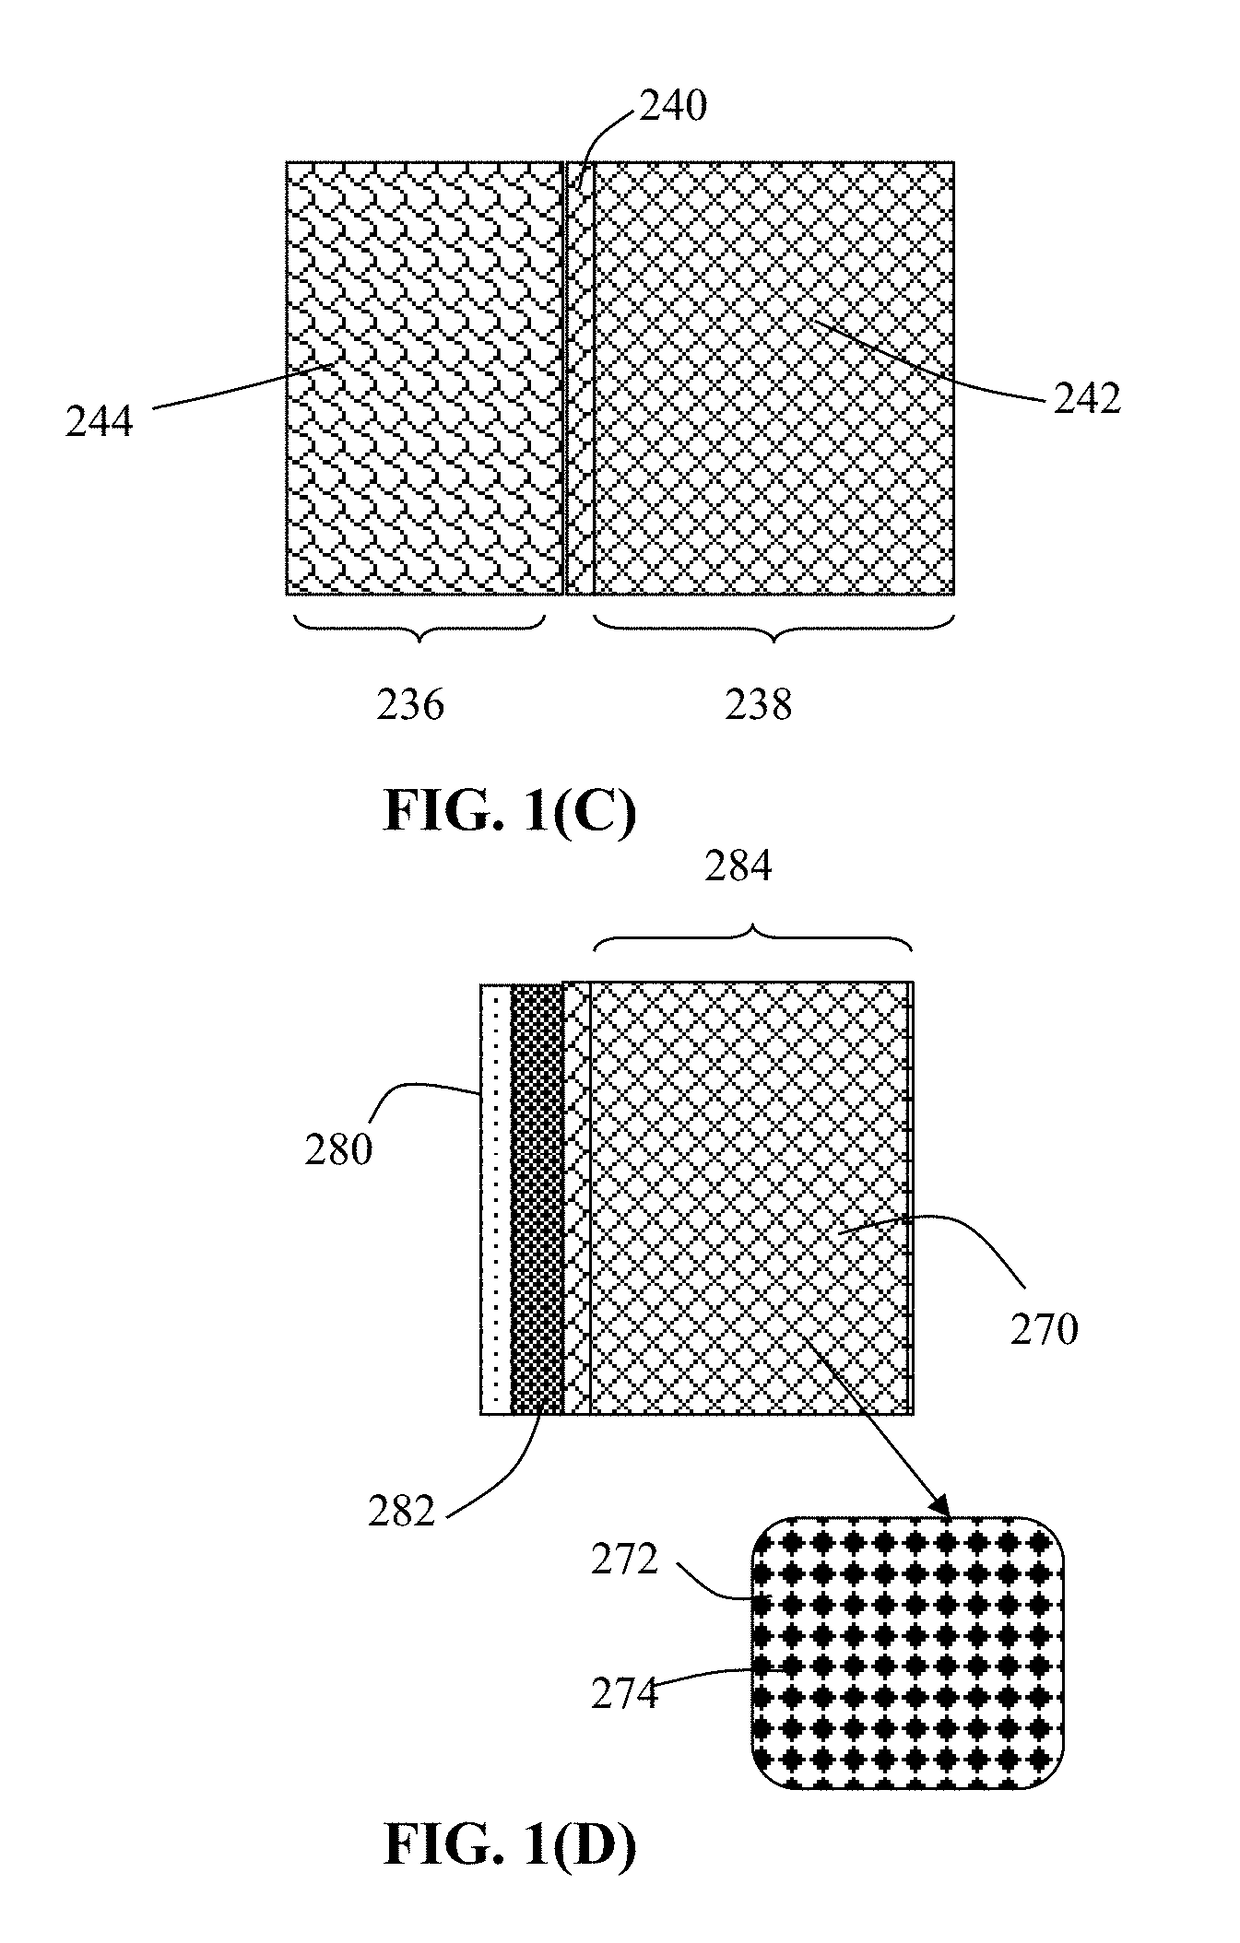 Method of Producing Shape-Conformable Alkali Metal-Sulfur Battery Having a Deformable and Conductive Quasi-Solid Electrode